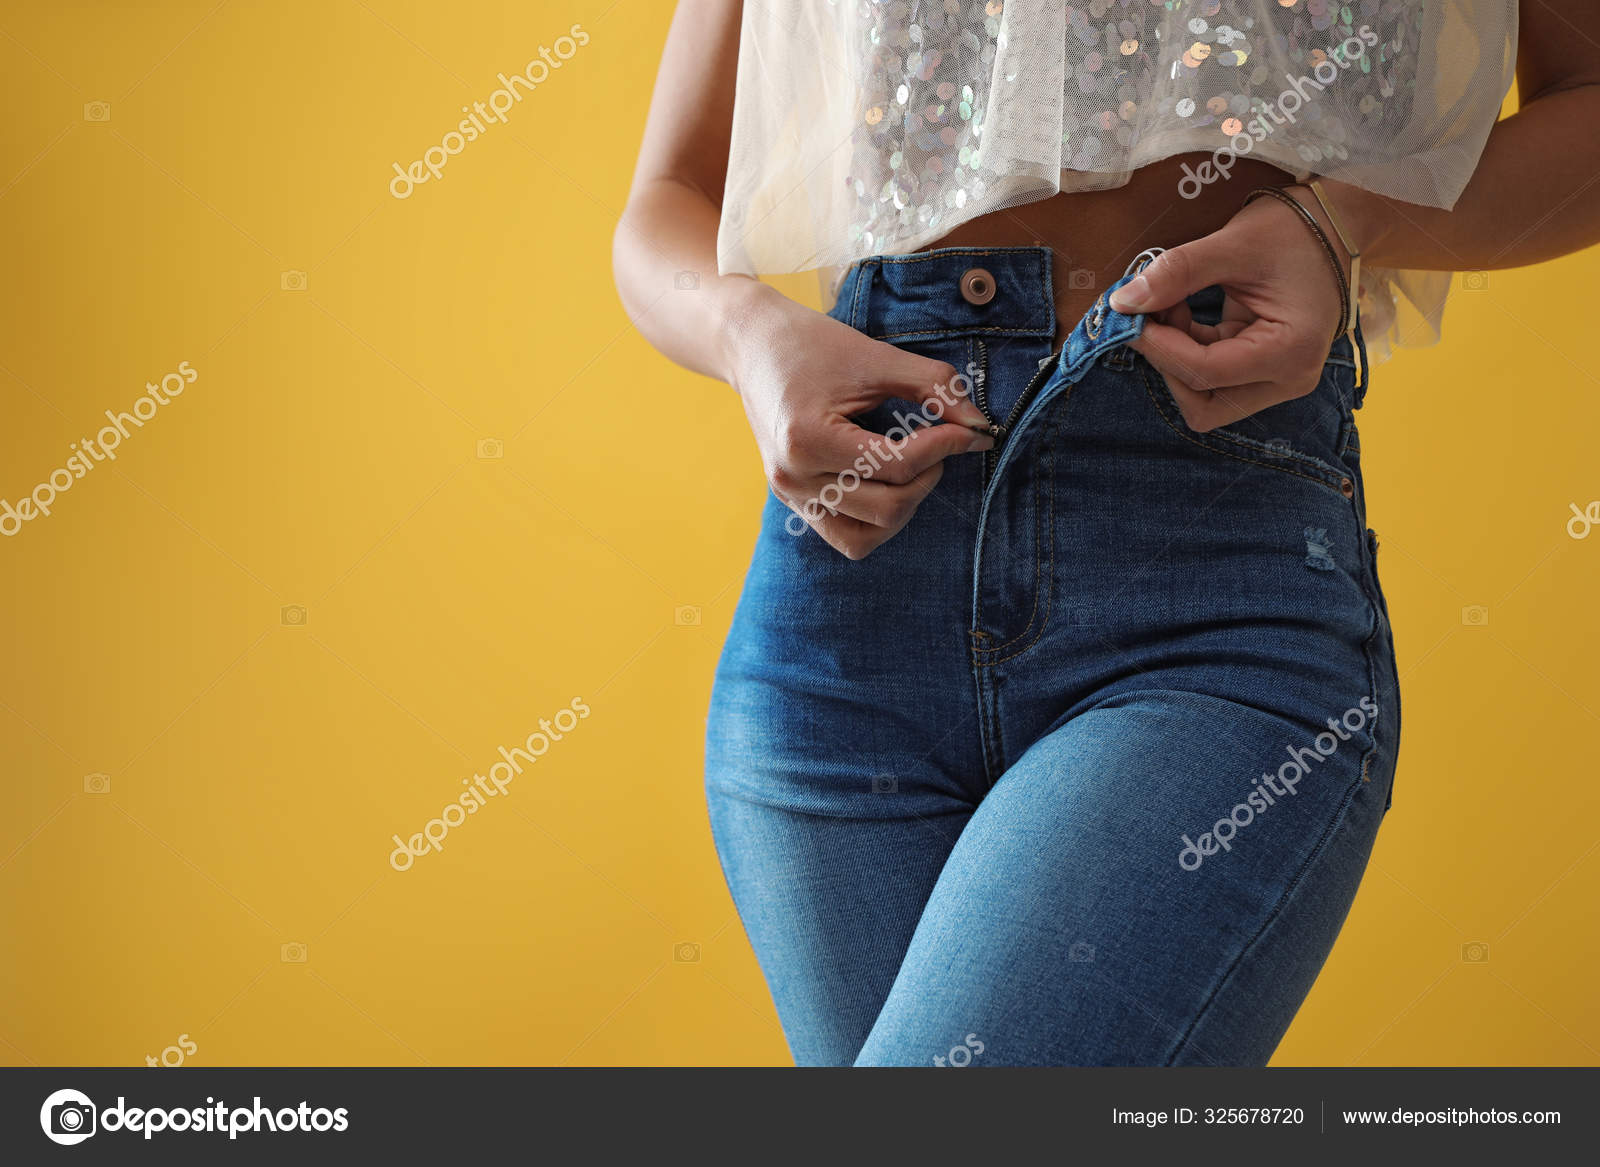 Teen Girl With Unzipped Shorts